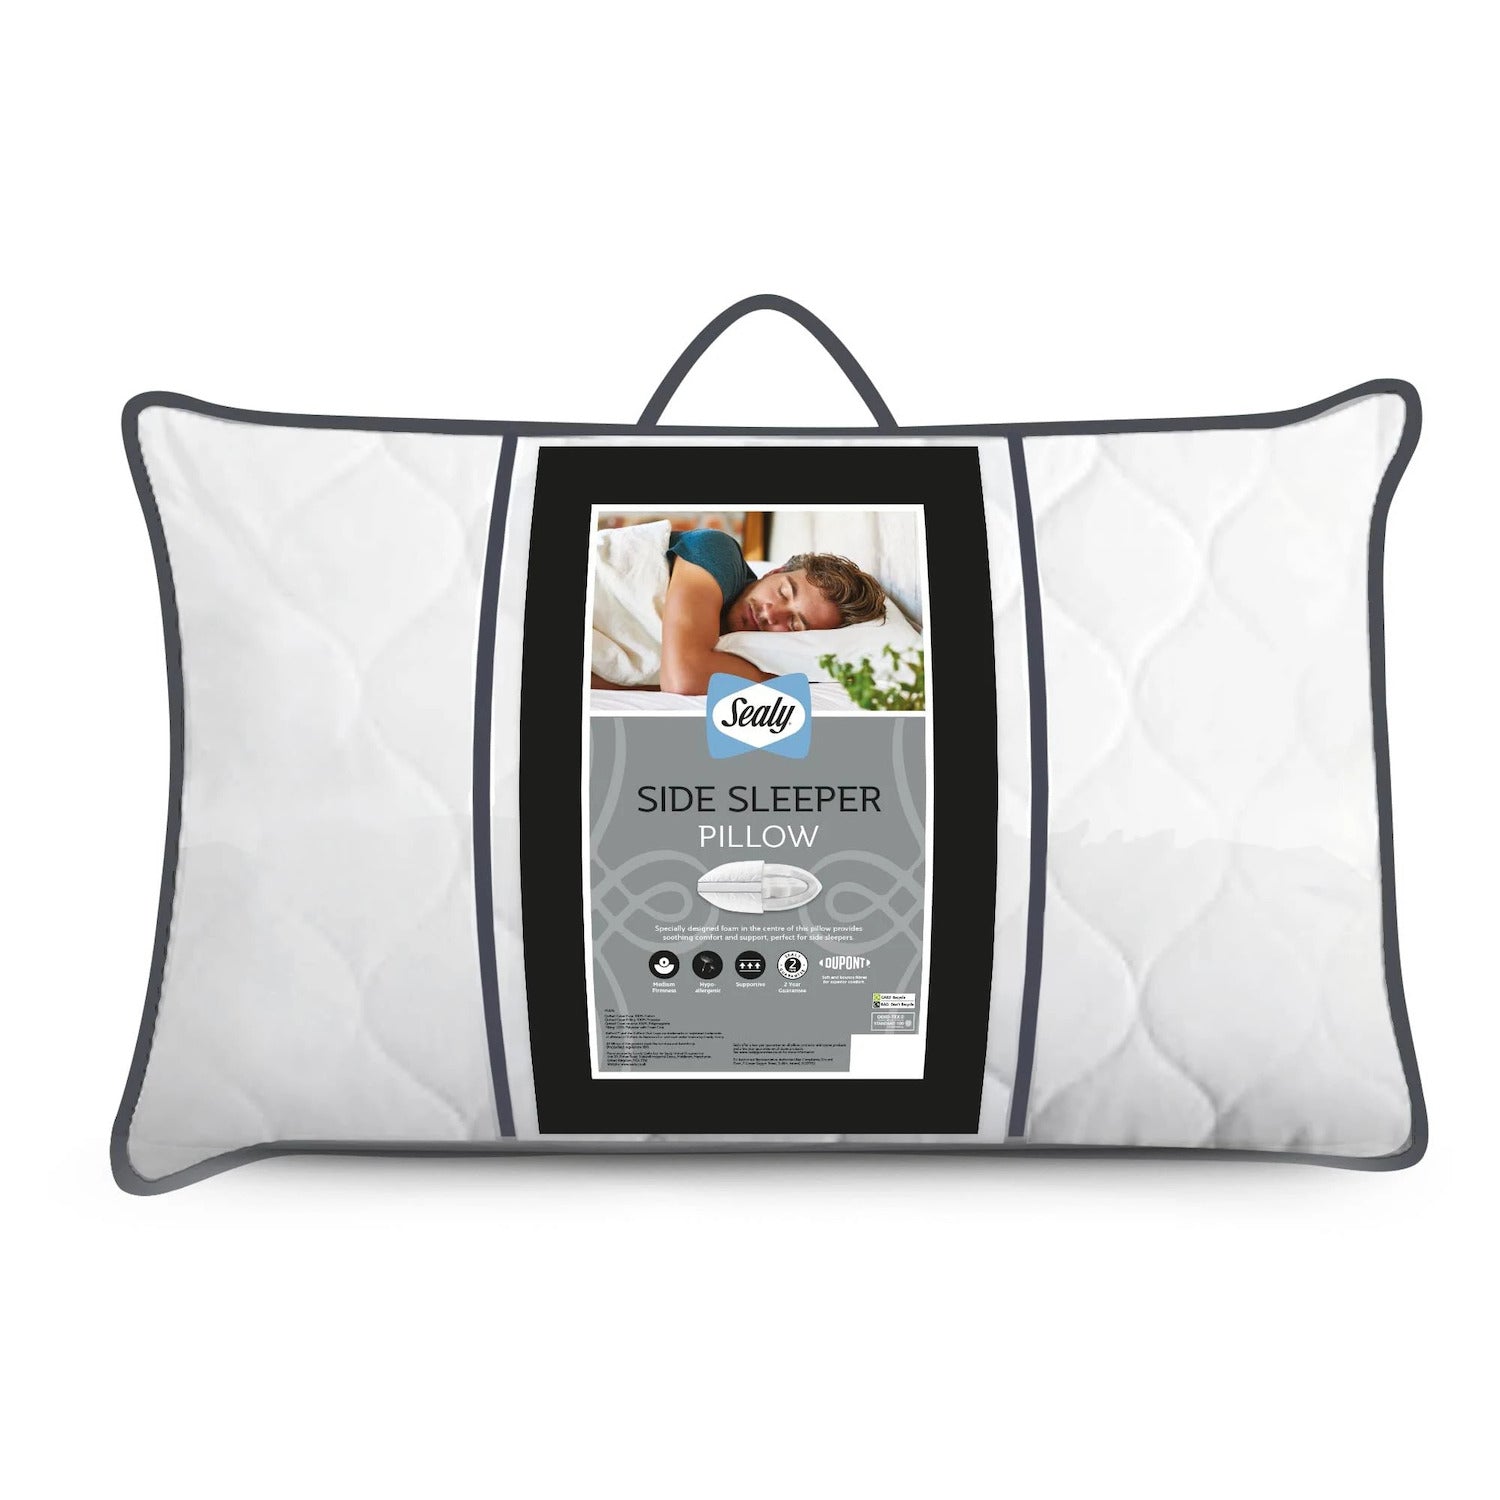 The Sealy Side Sleeper Pillow 